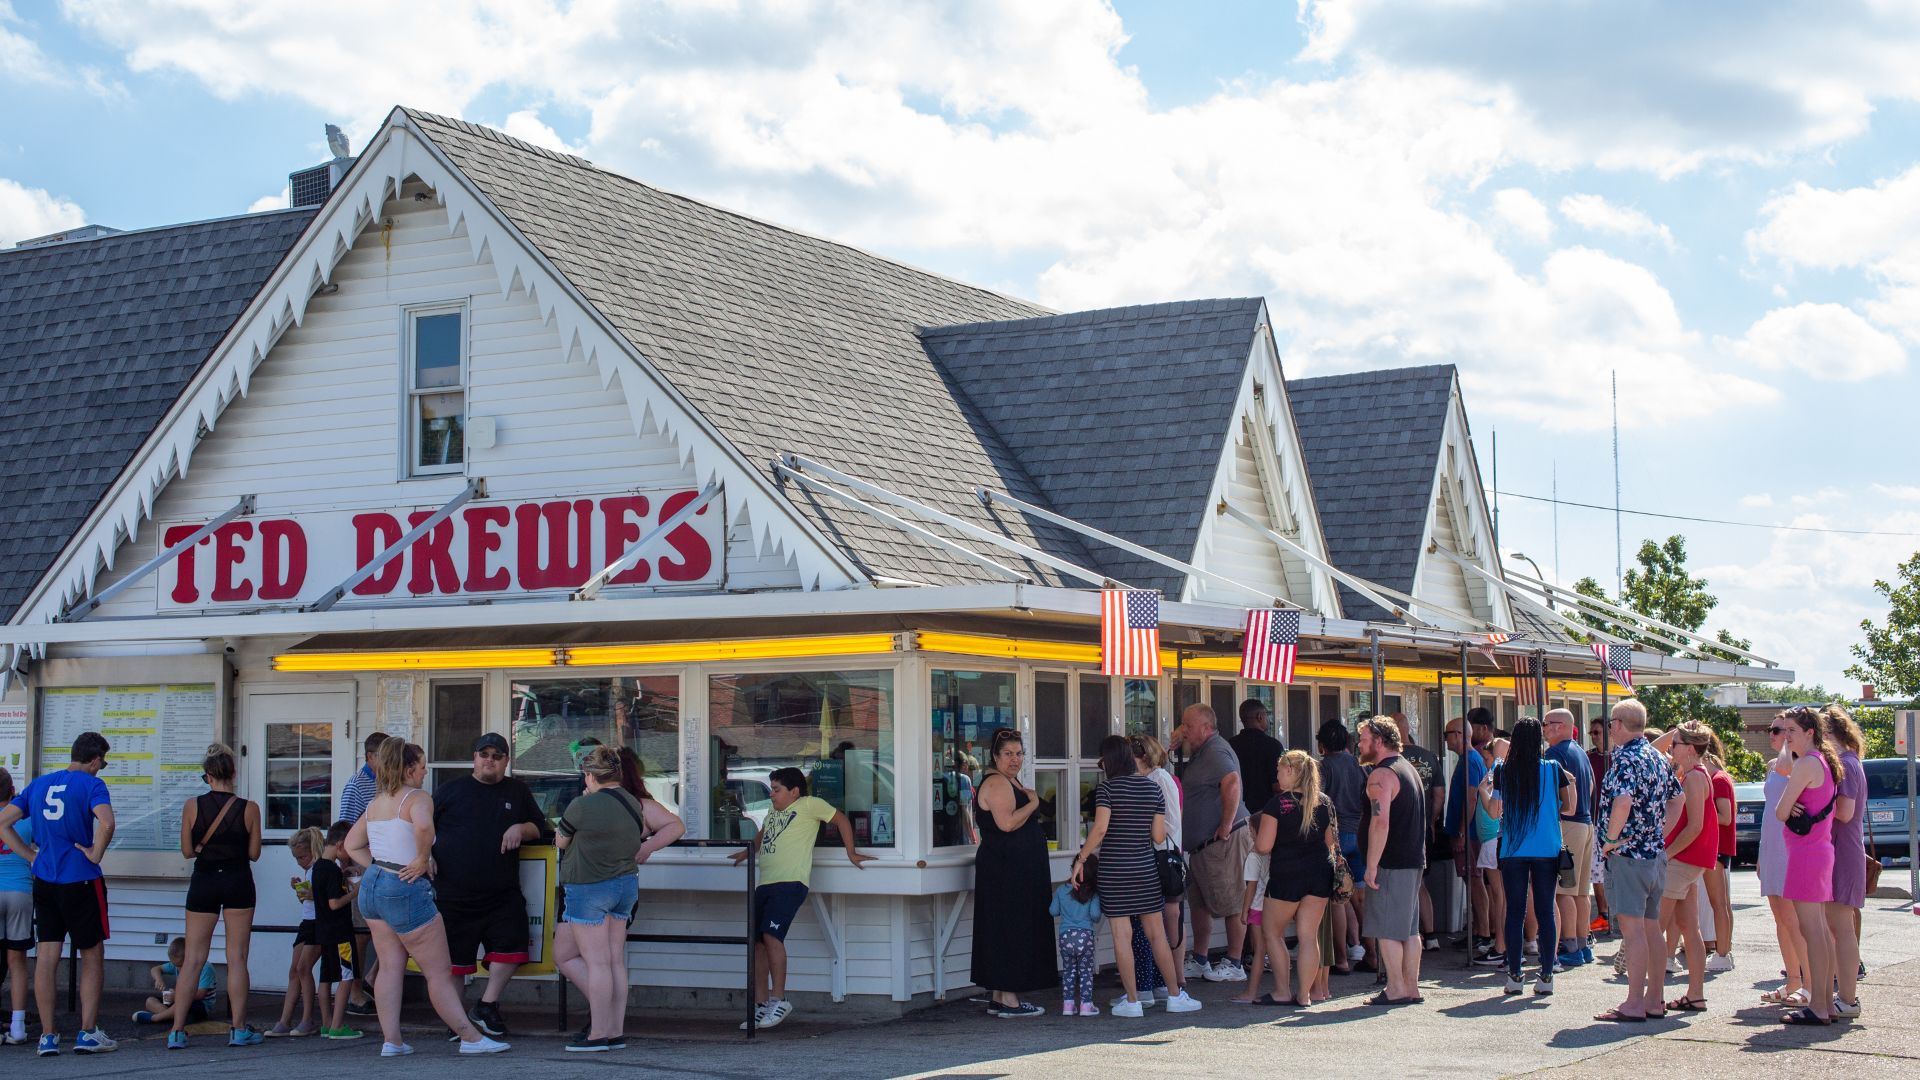 People wait in line at Ted Drewes for their frozen custard fix.